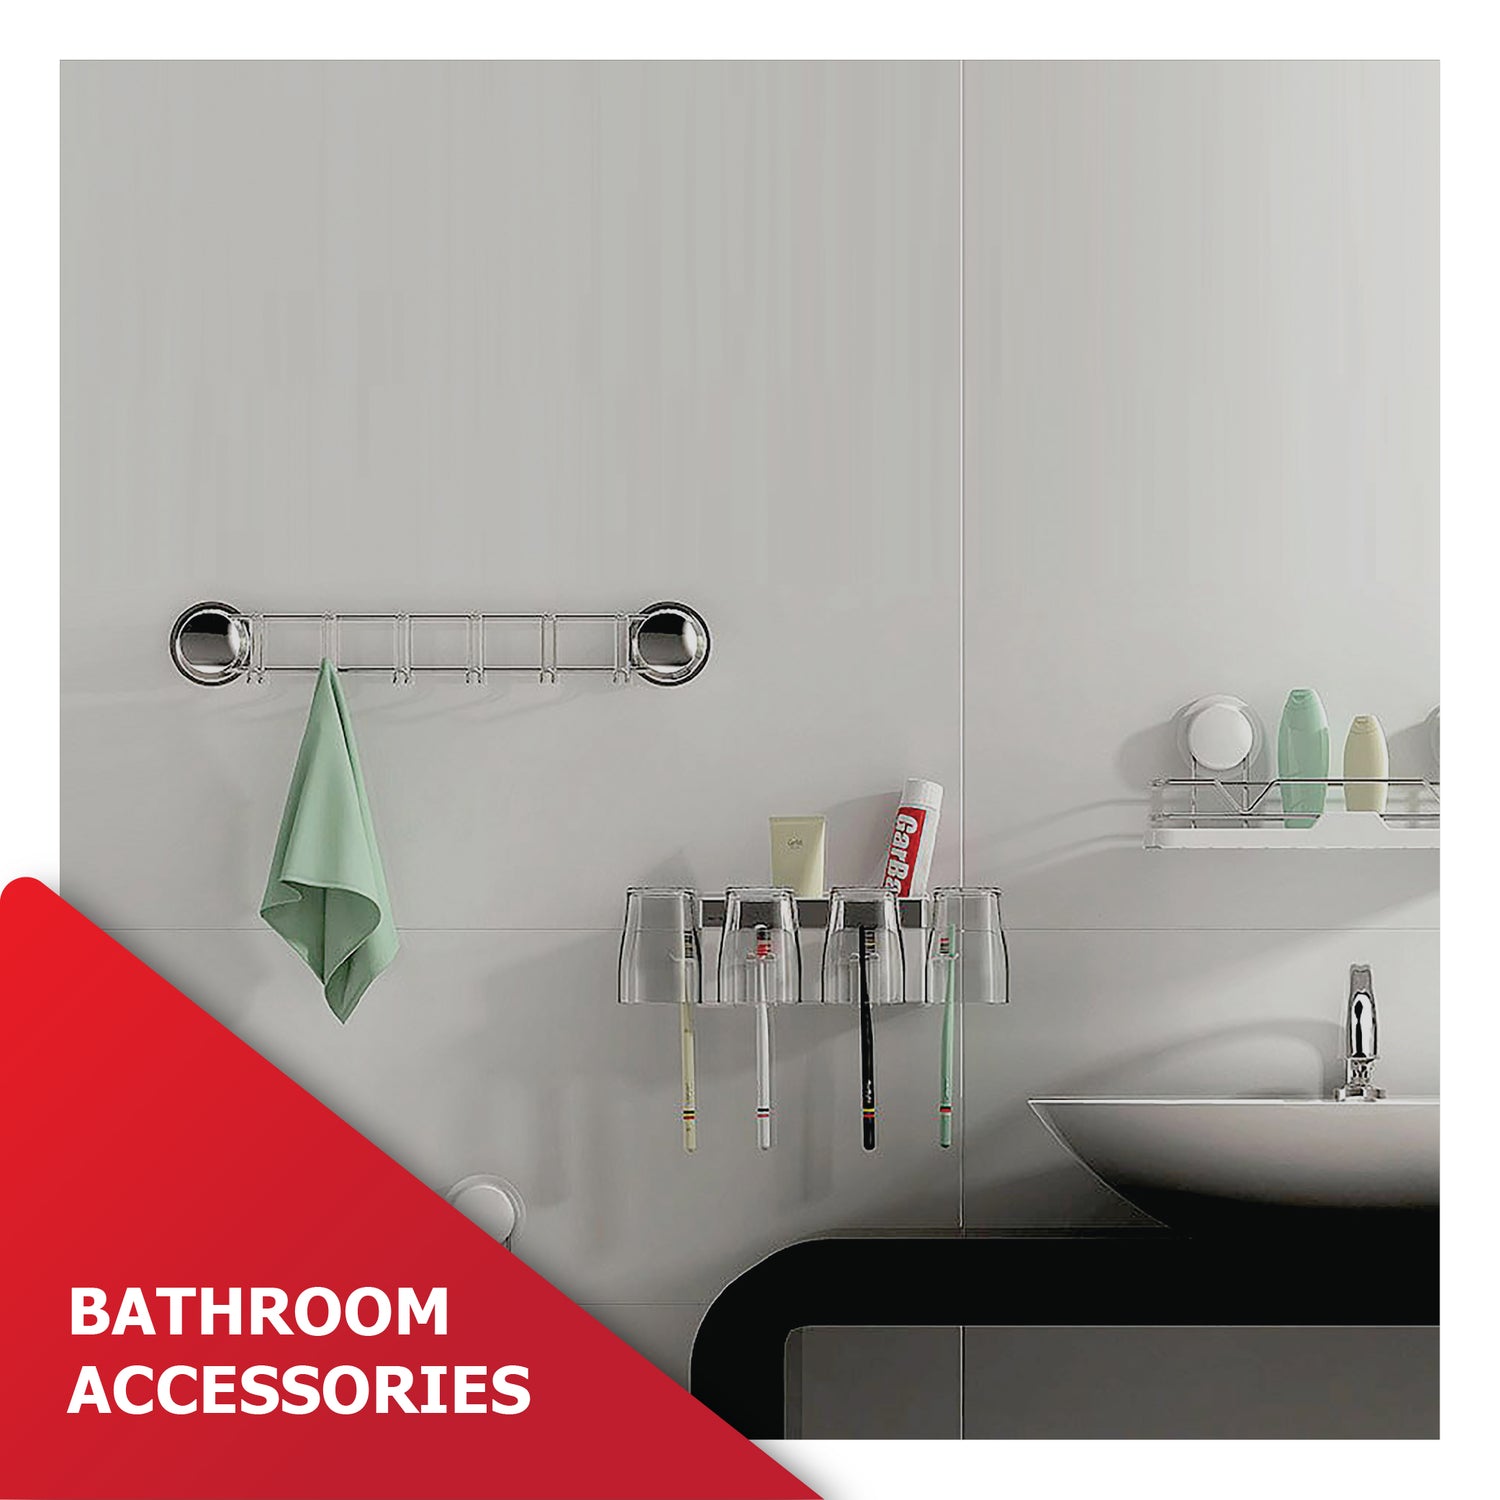 316 Bathroom Accessories - Premium and Durable Collection